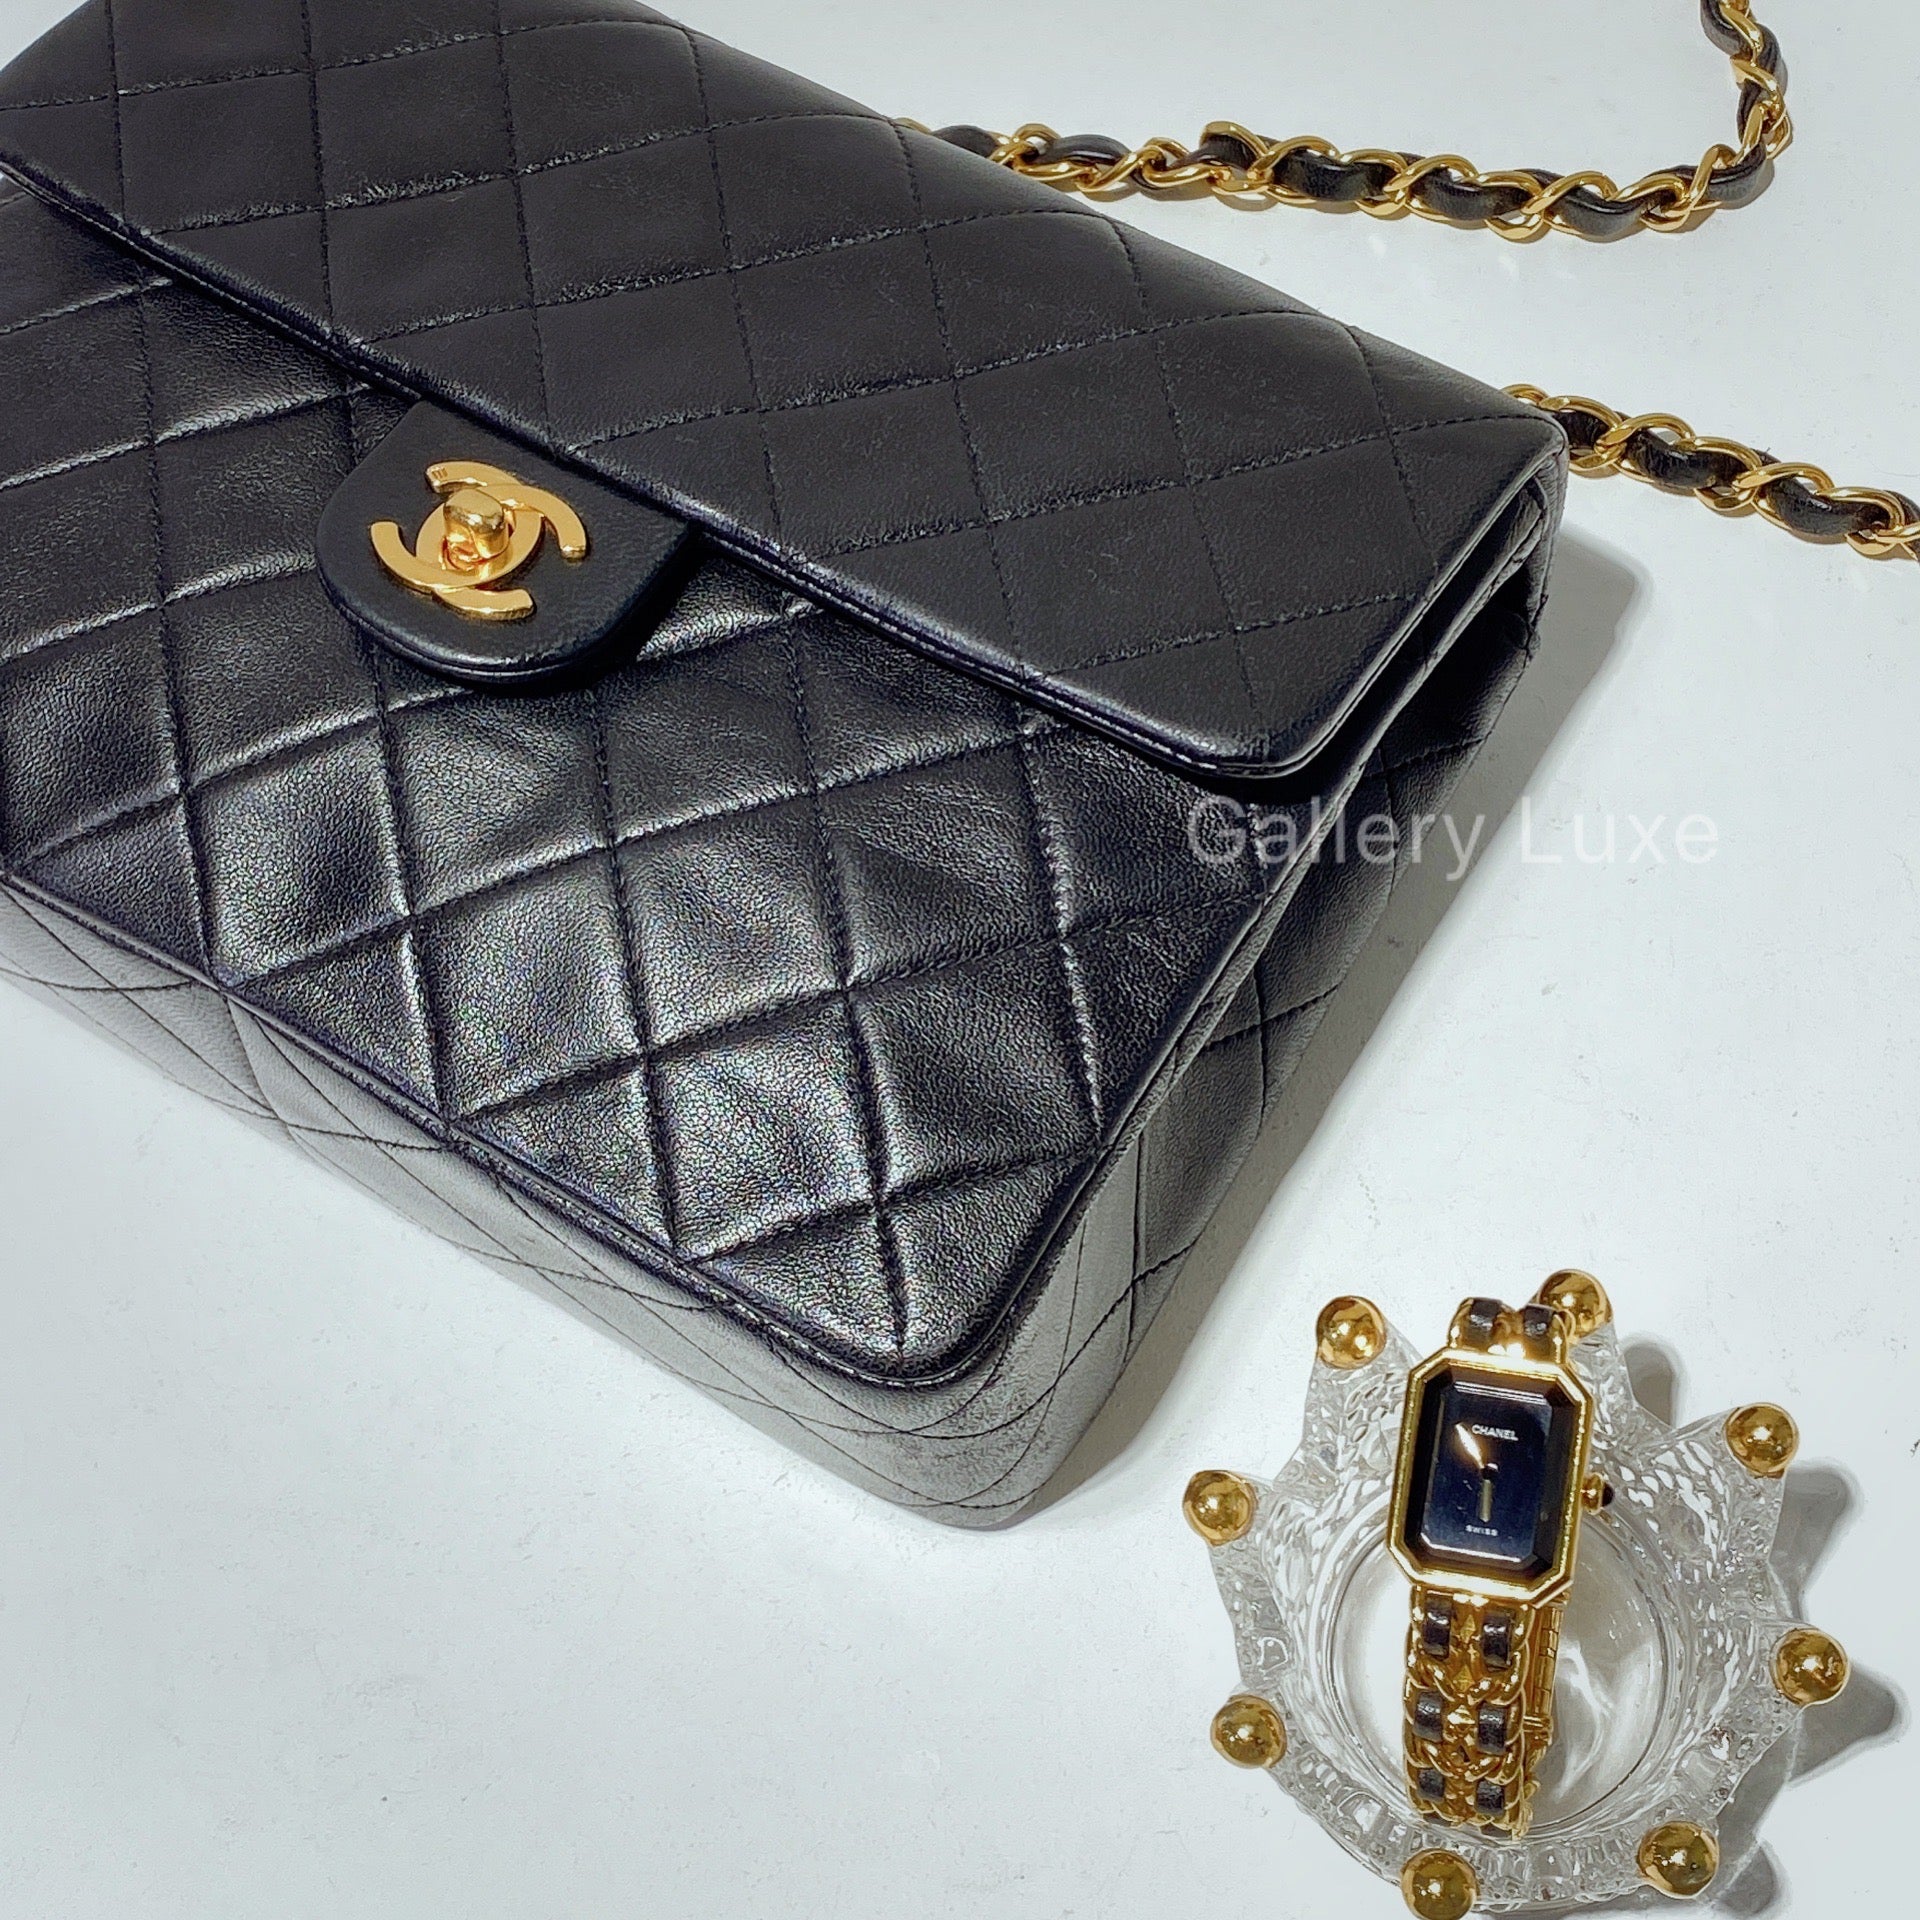 No.2436-Chanel Vintage Classic Flap Mini 20cm – Gallery Luxe